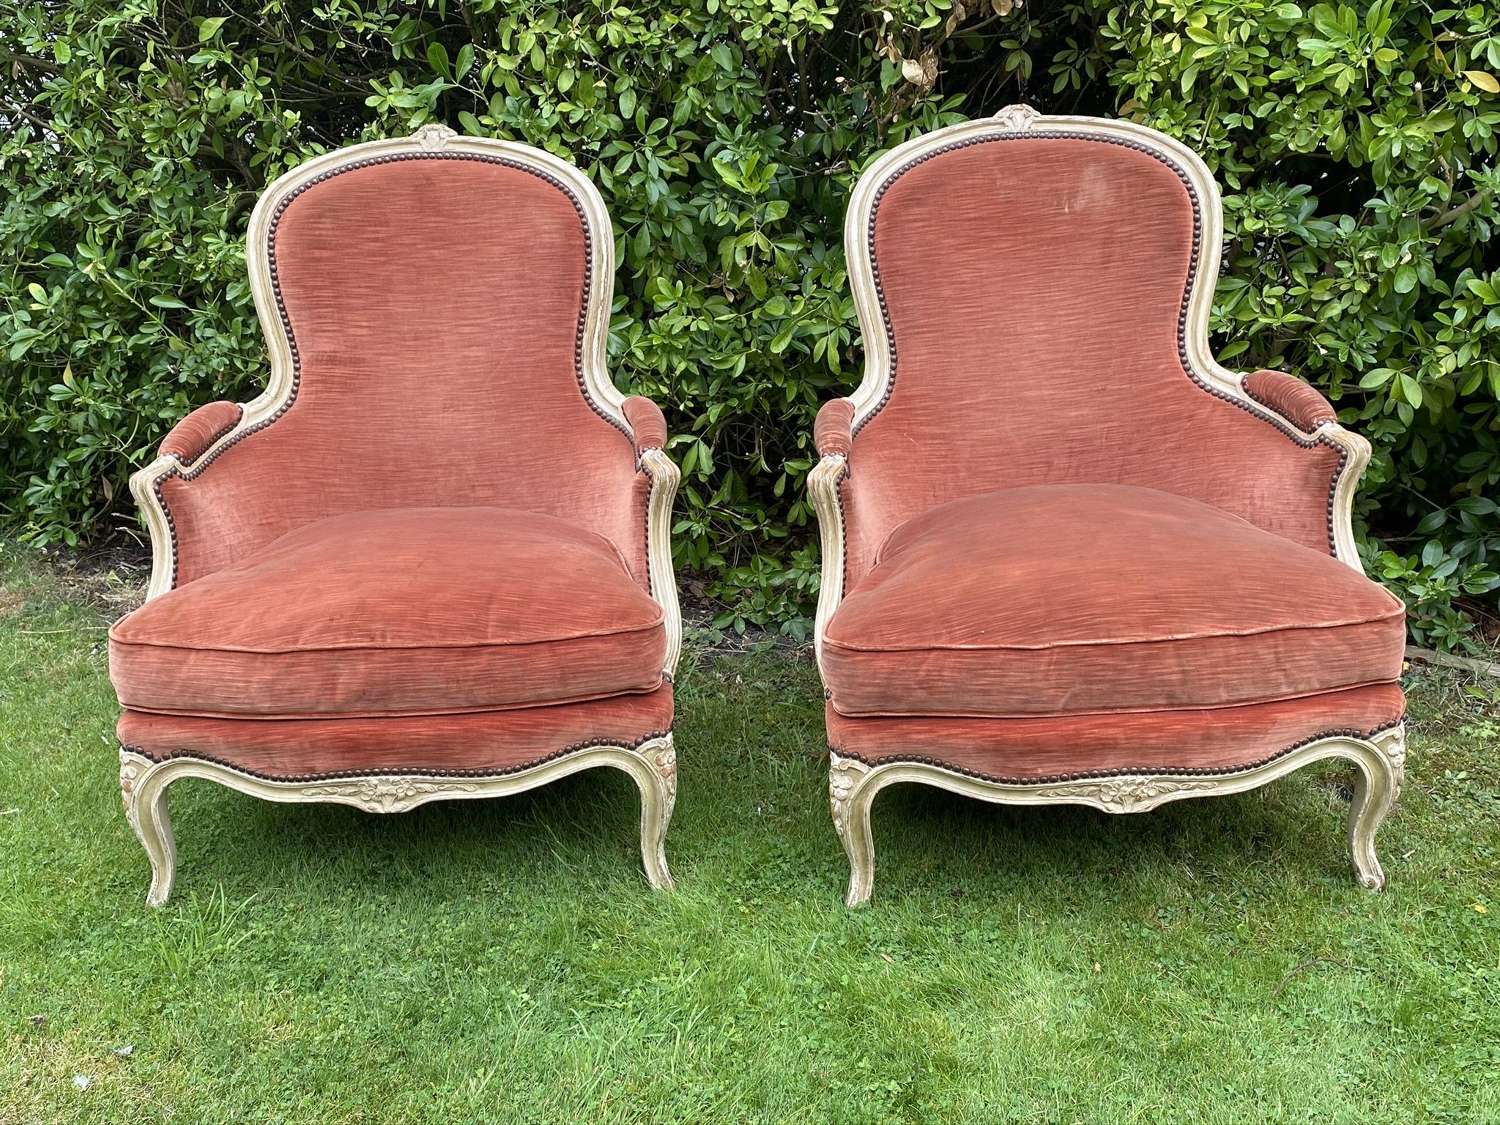 Pair of painted armchairs